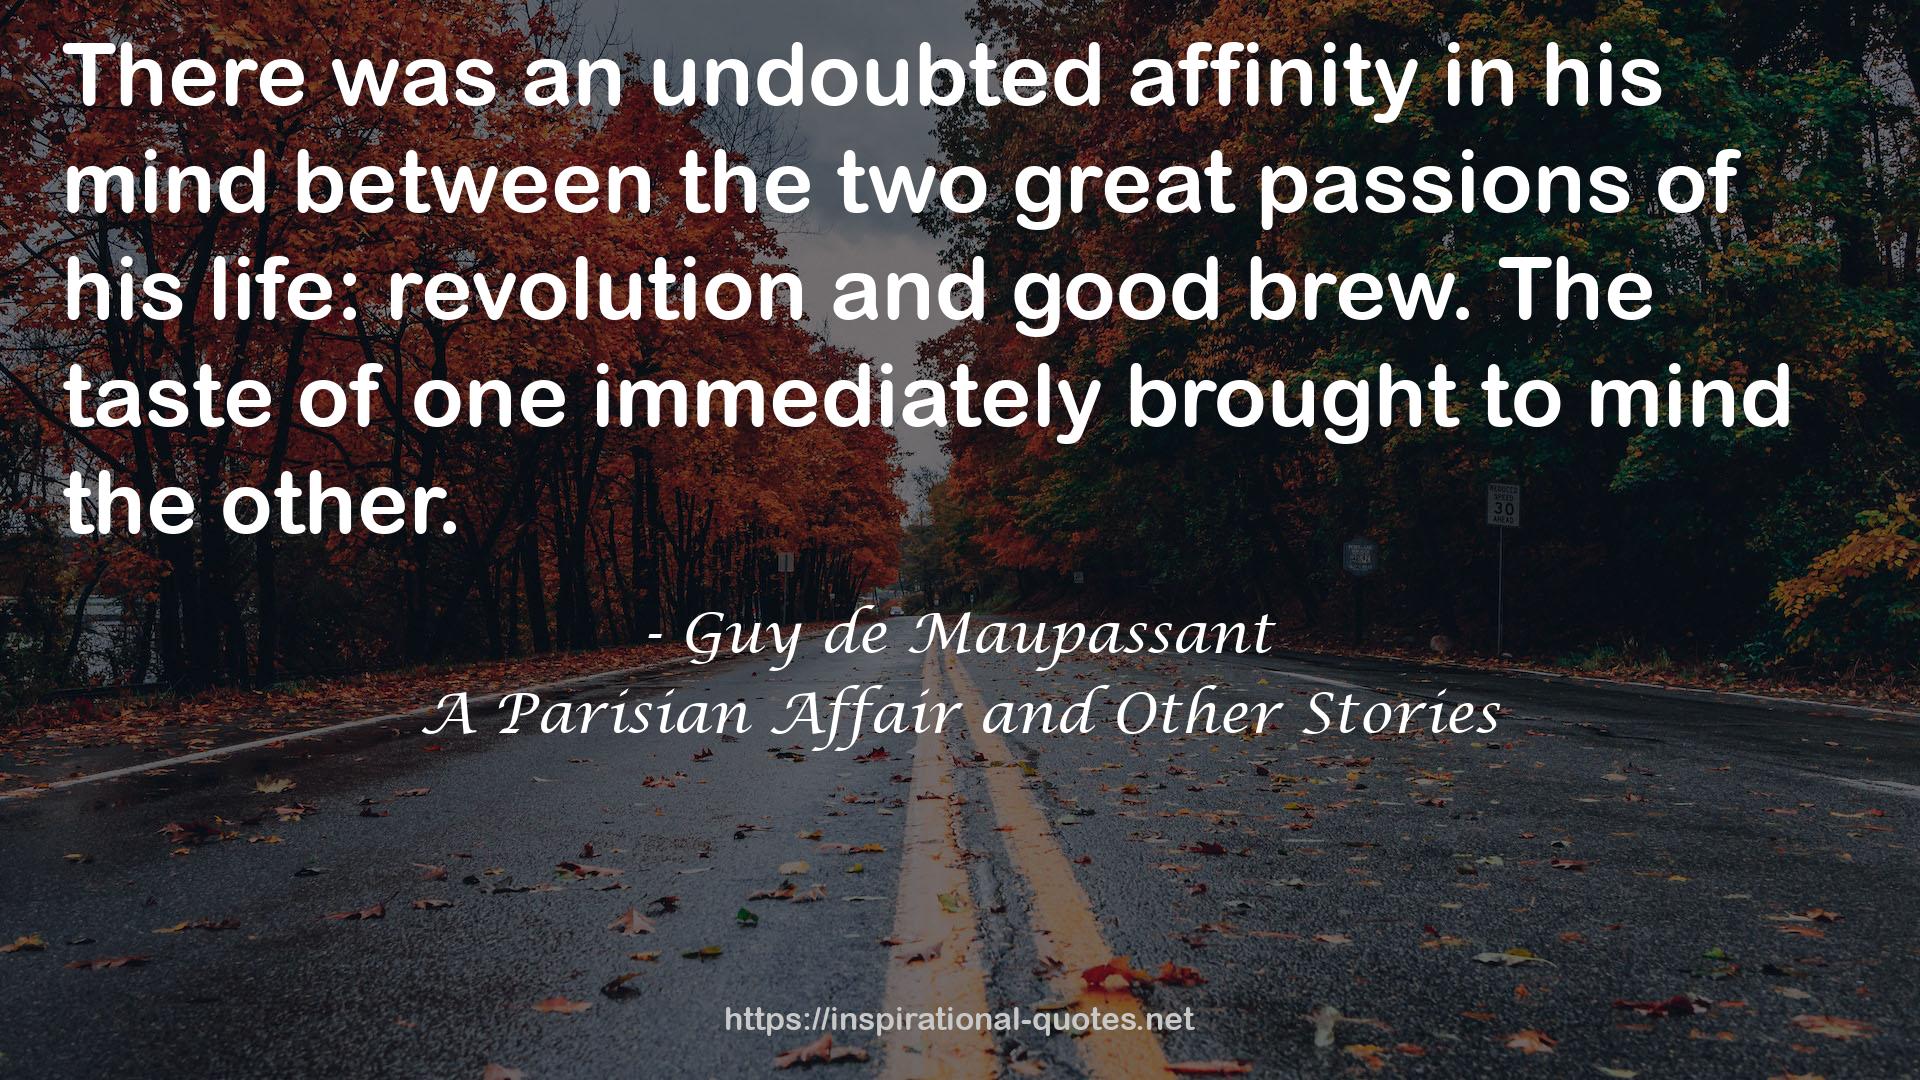 A Parisian Affair and Other Stories QUOTES